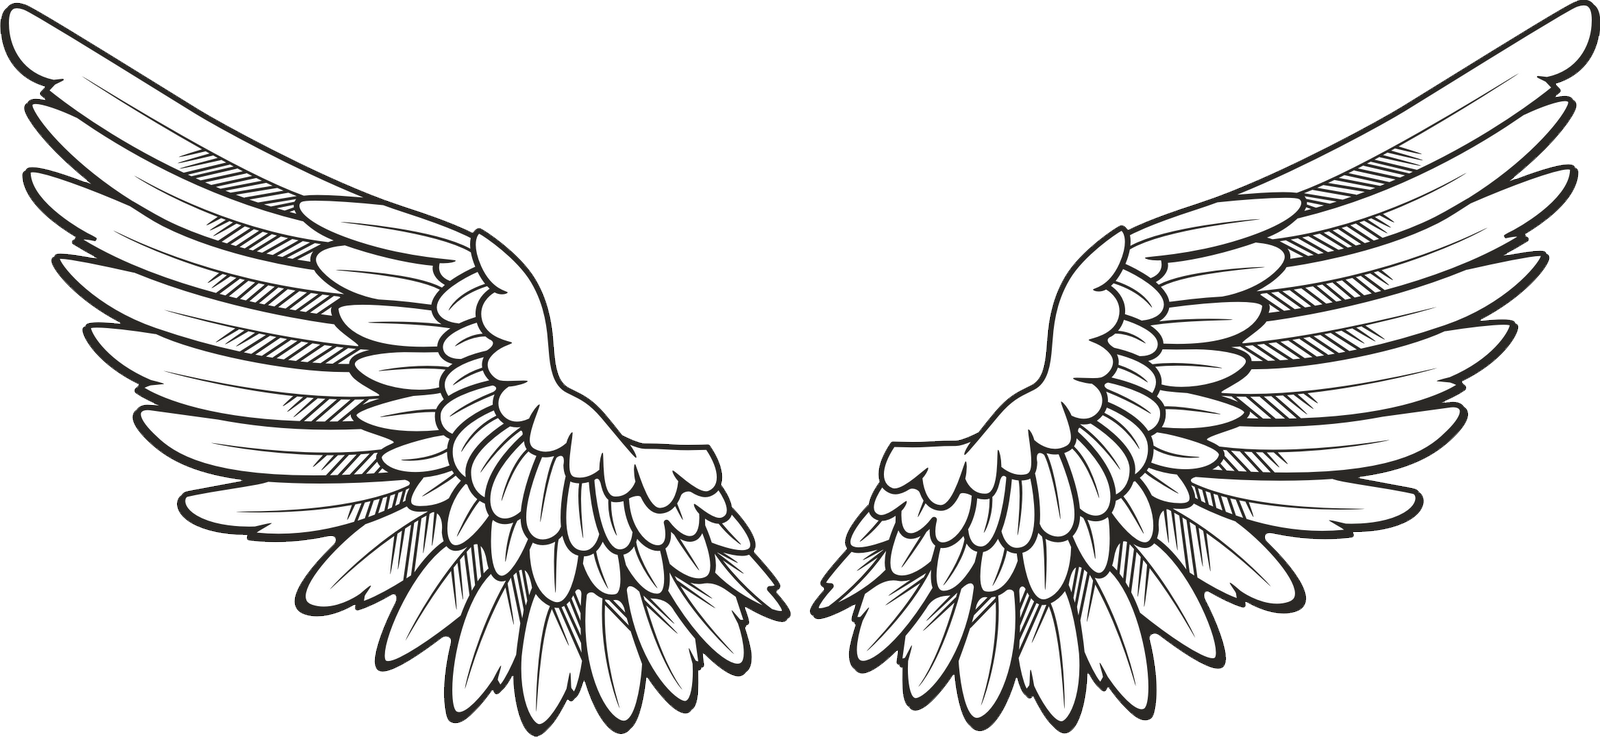 Angel Halo Wings Png Free Download - Black And White Halo, Transparent background PNG HD thumbnail